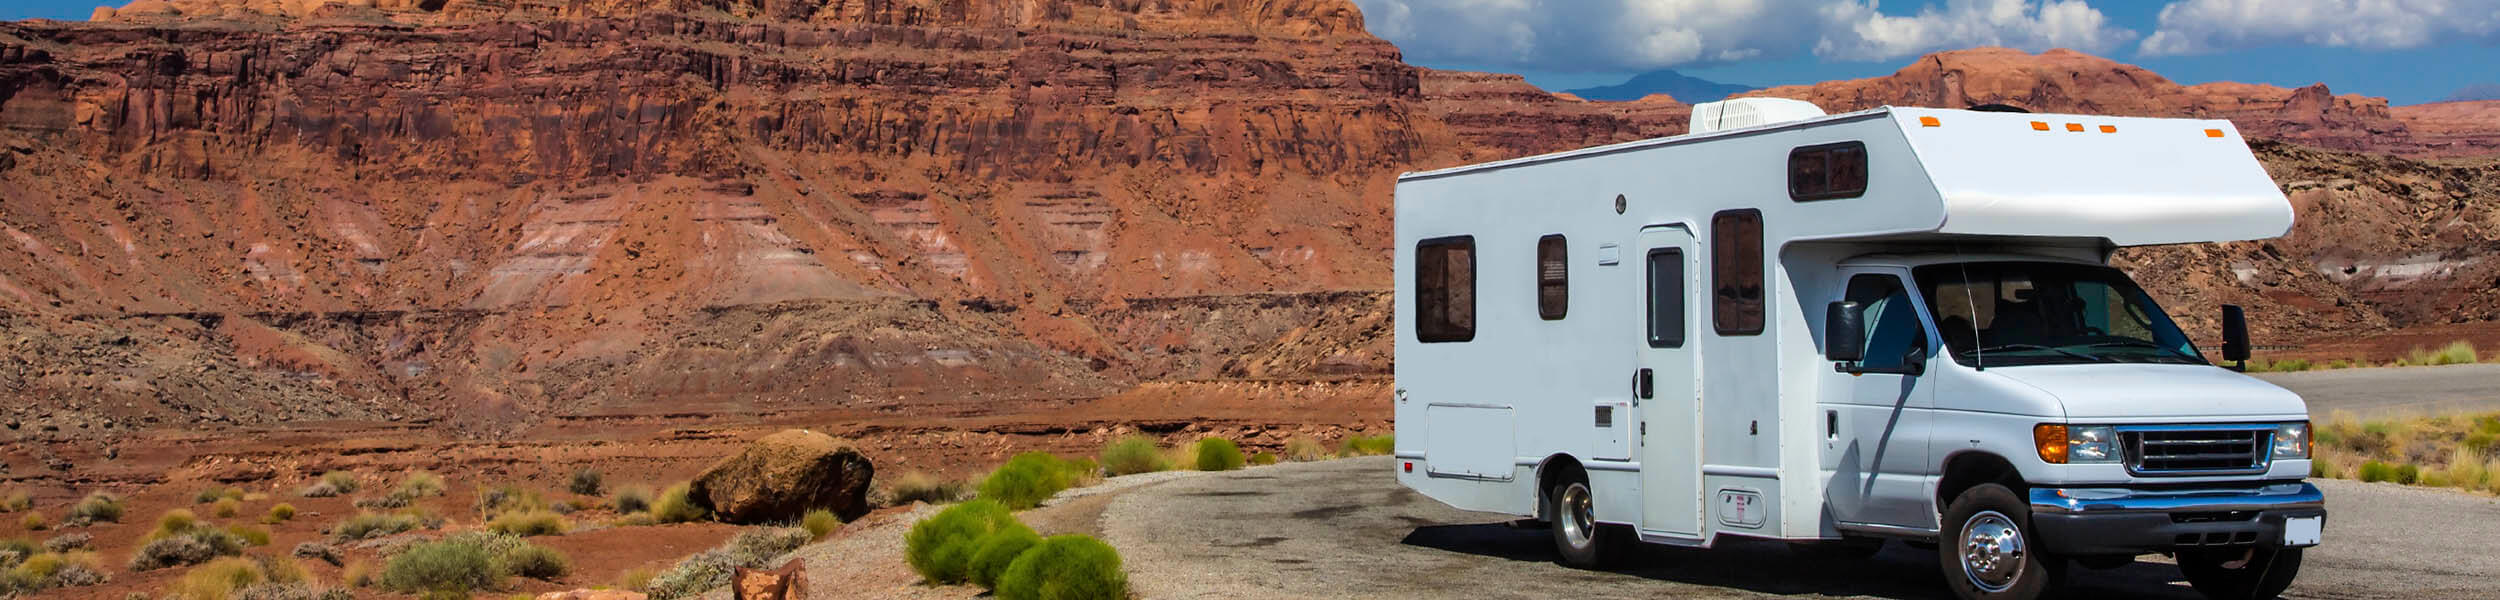 rv and red rock